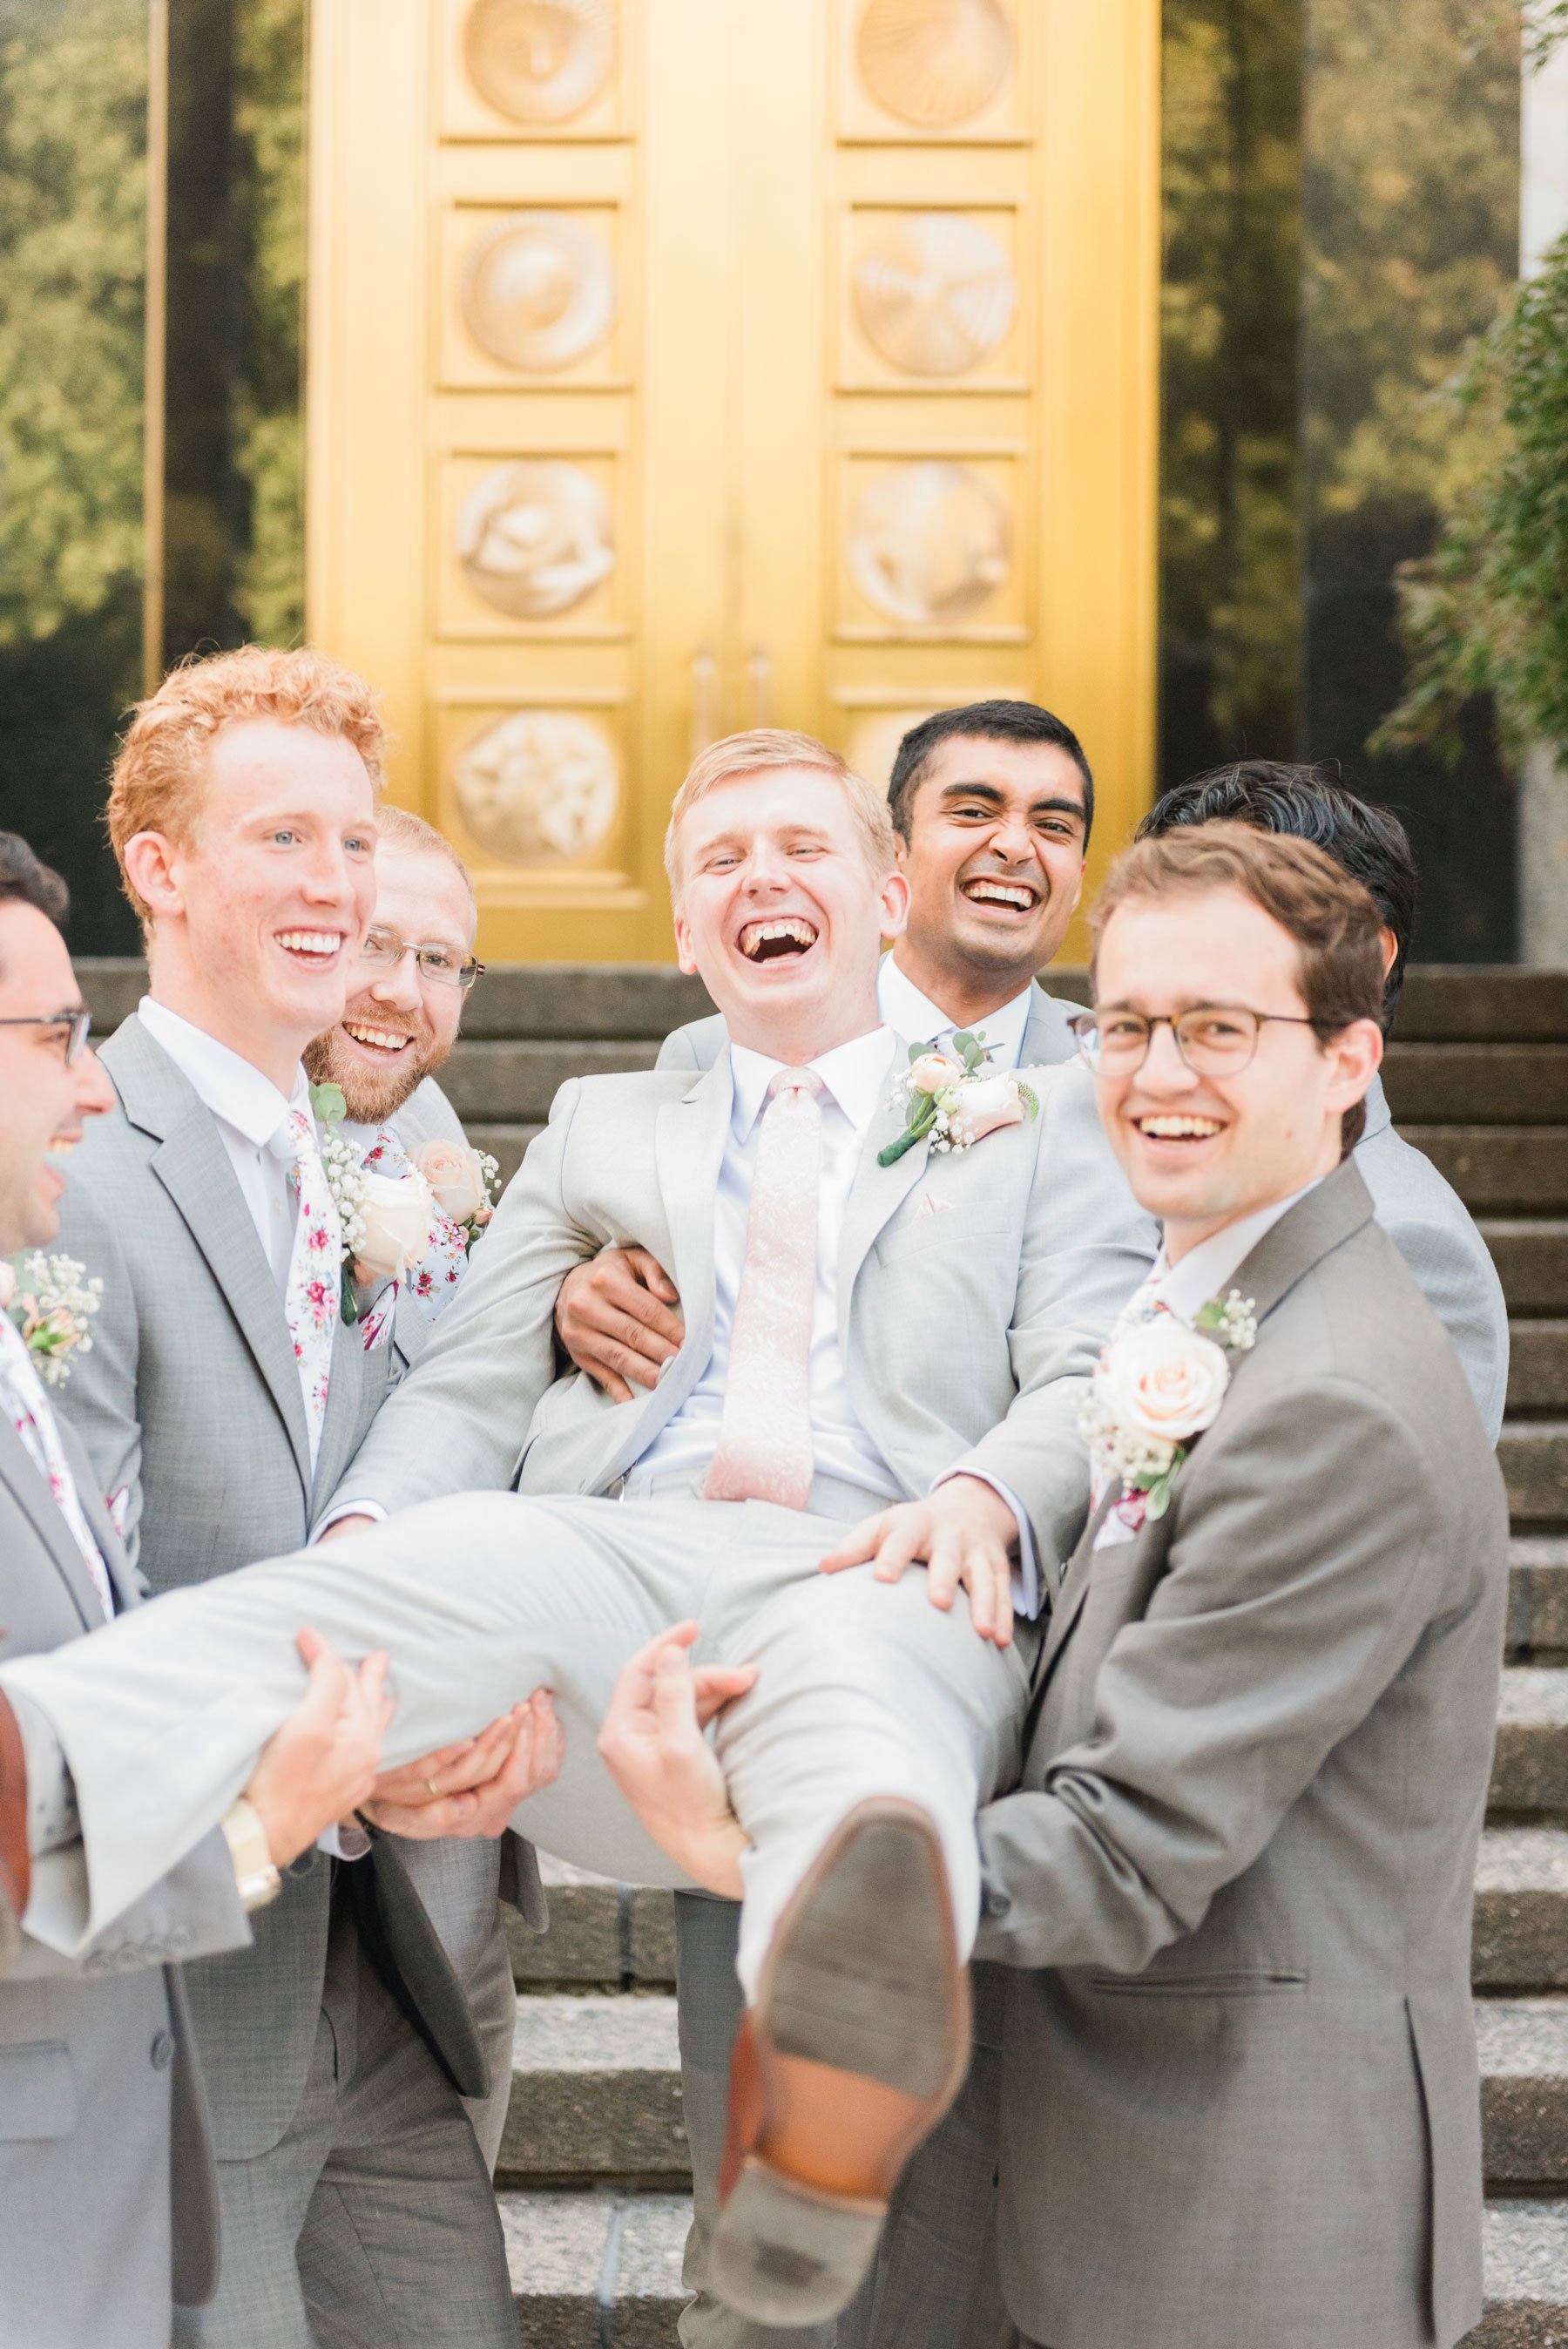    Fun groomsmen lift the groom for a silly bridal party pose outside of the lds temple doors. #washingtondctemple #washingtondcweddingphotographer #dcwedding #pinkwedding #ldsweddingphotographer #pinkweddingbouquet #washingtondctempleexit #eastcoast